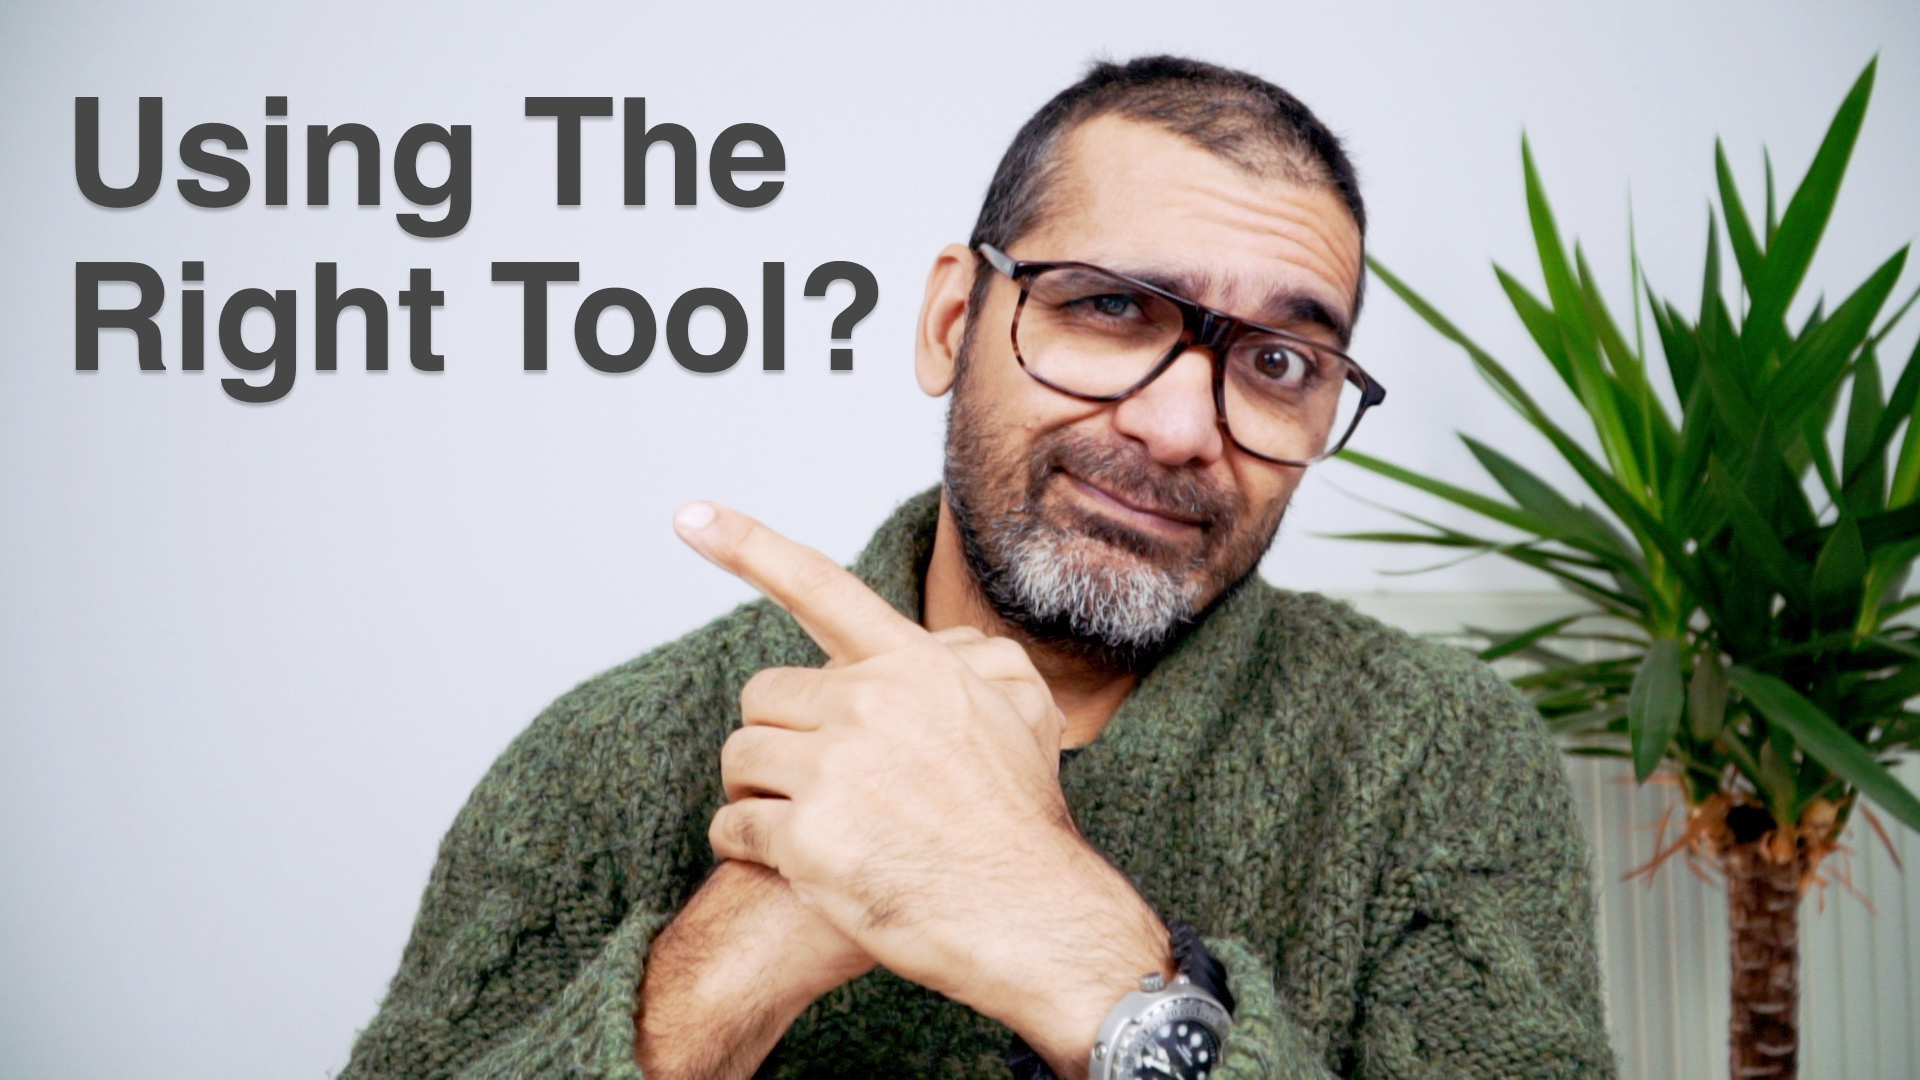 Are you using the right tool?